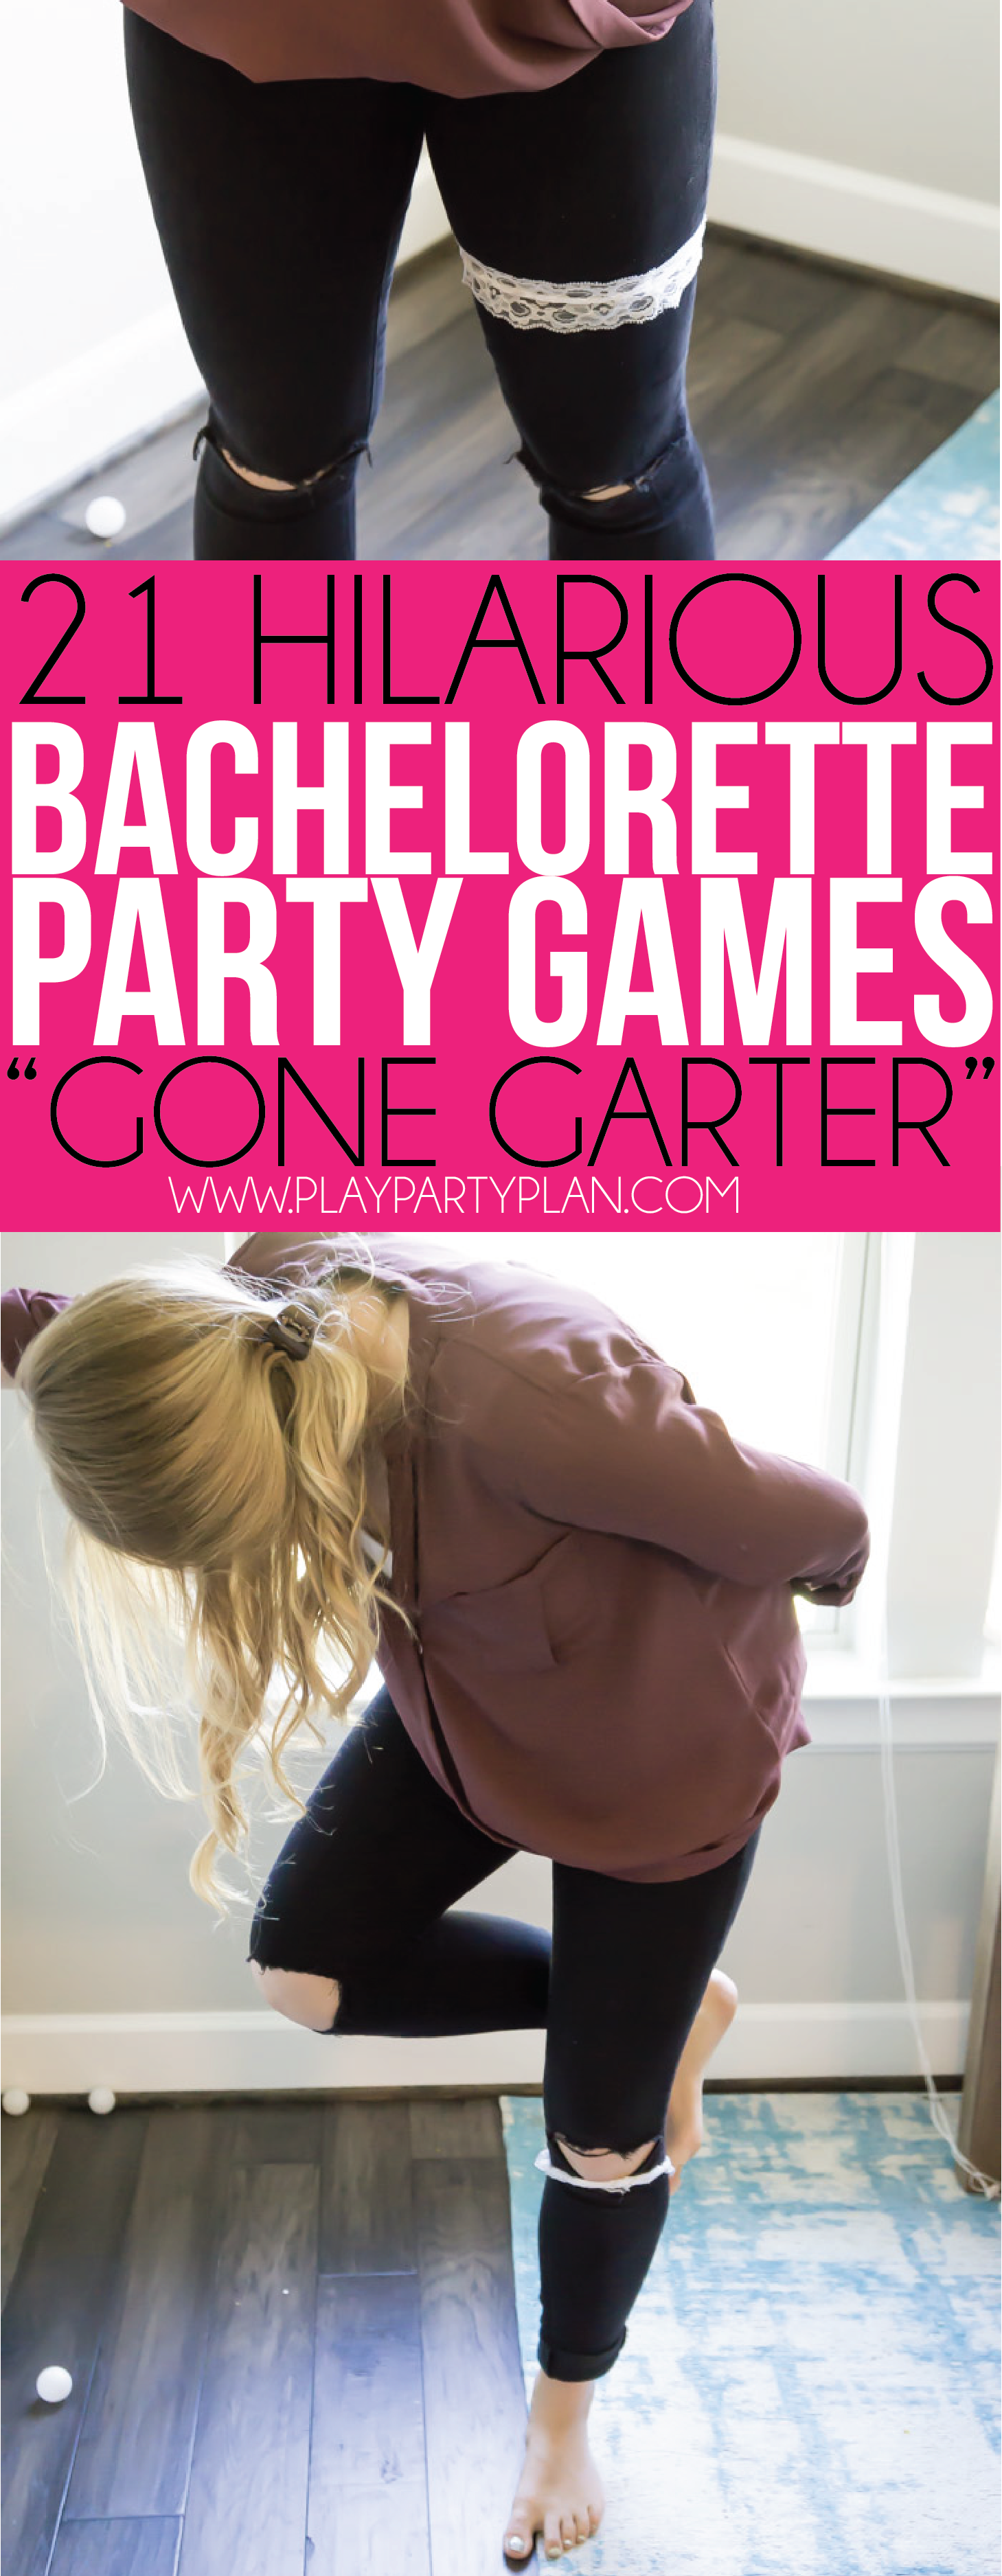 This gone garter game is one of the most hilarious bachelorette party games out there